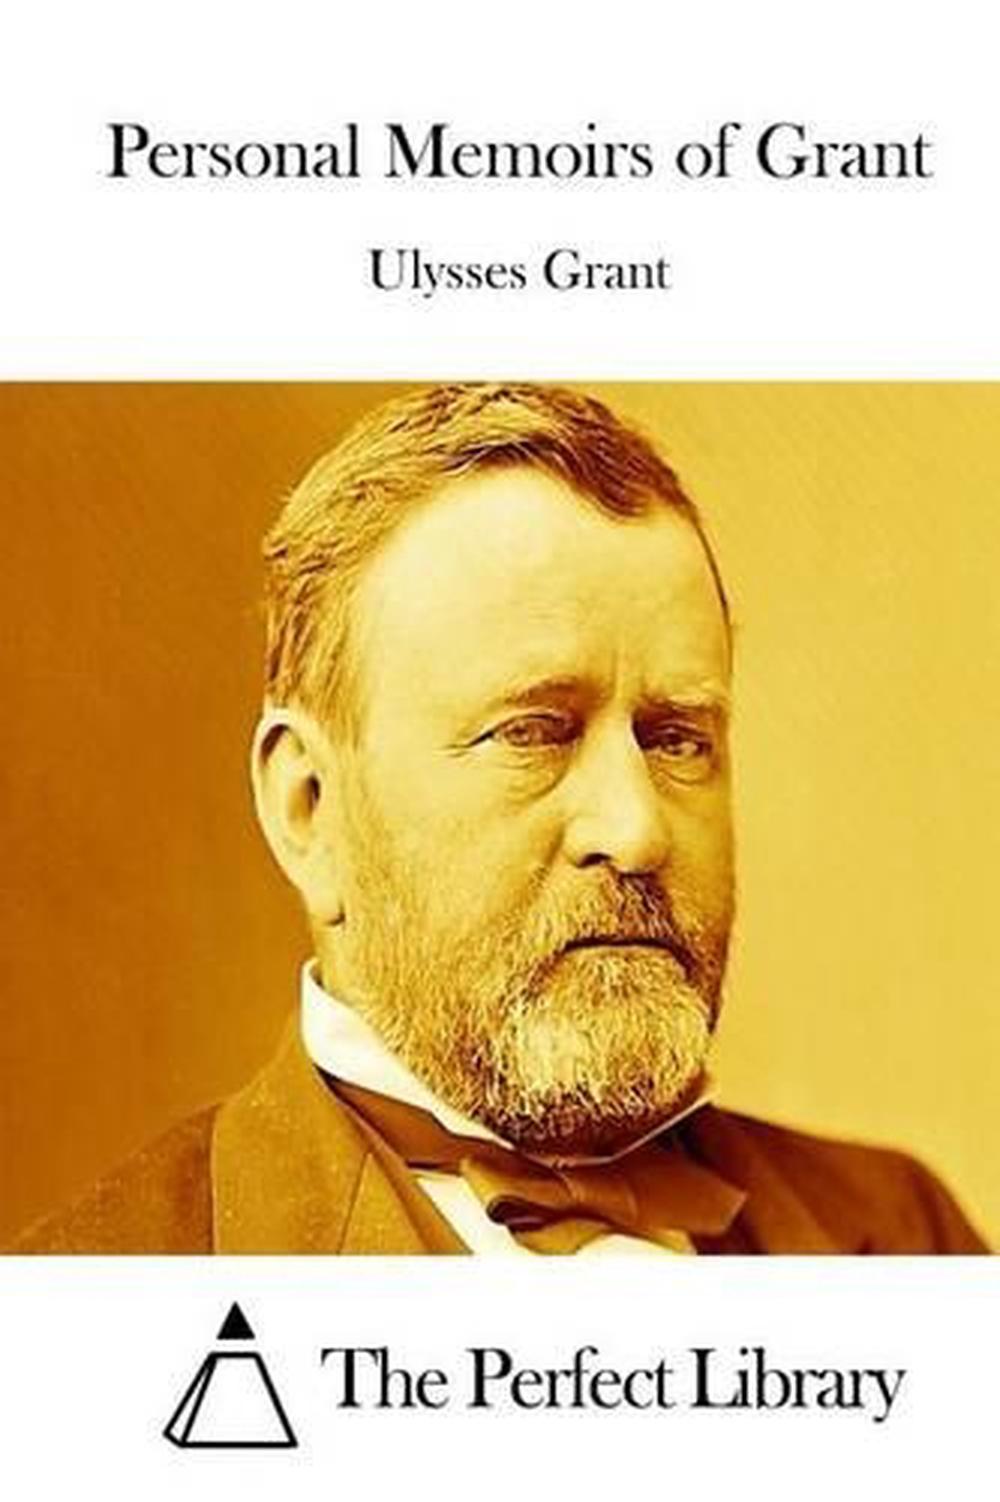 The Complete Personal Memoirs of Ulysses S Grant by Ulysses S. Grant